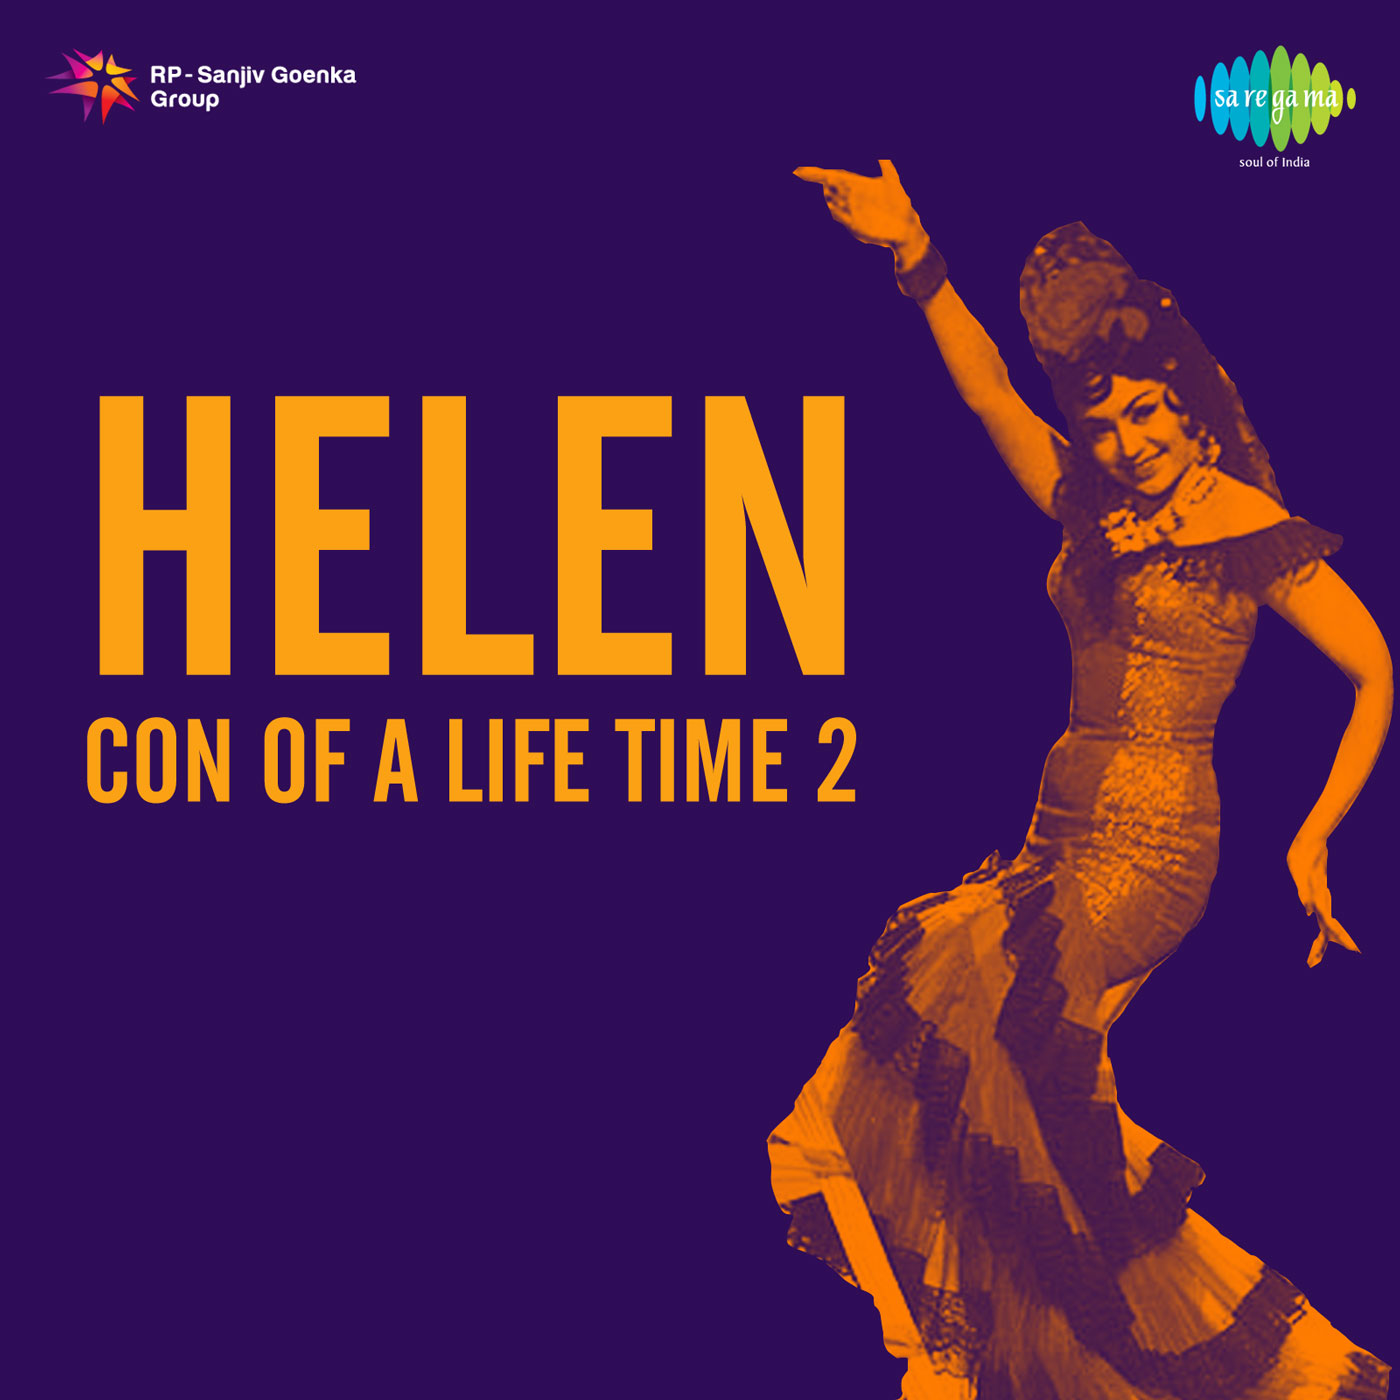 Helen Con Of A Life Time 2